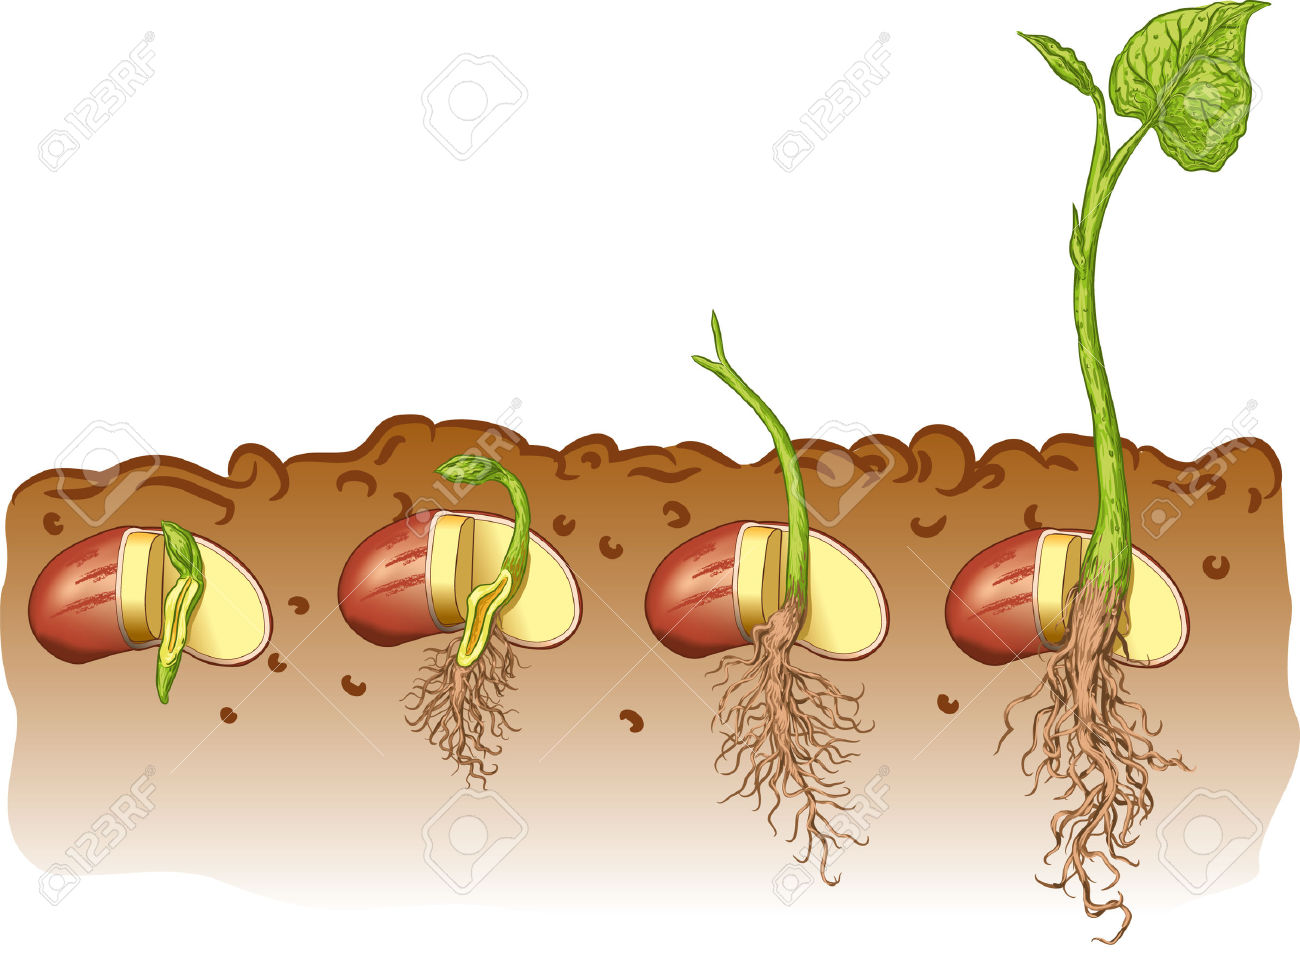 Seed Growing Clipart.